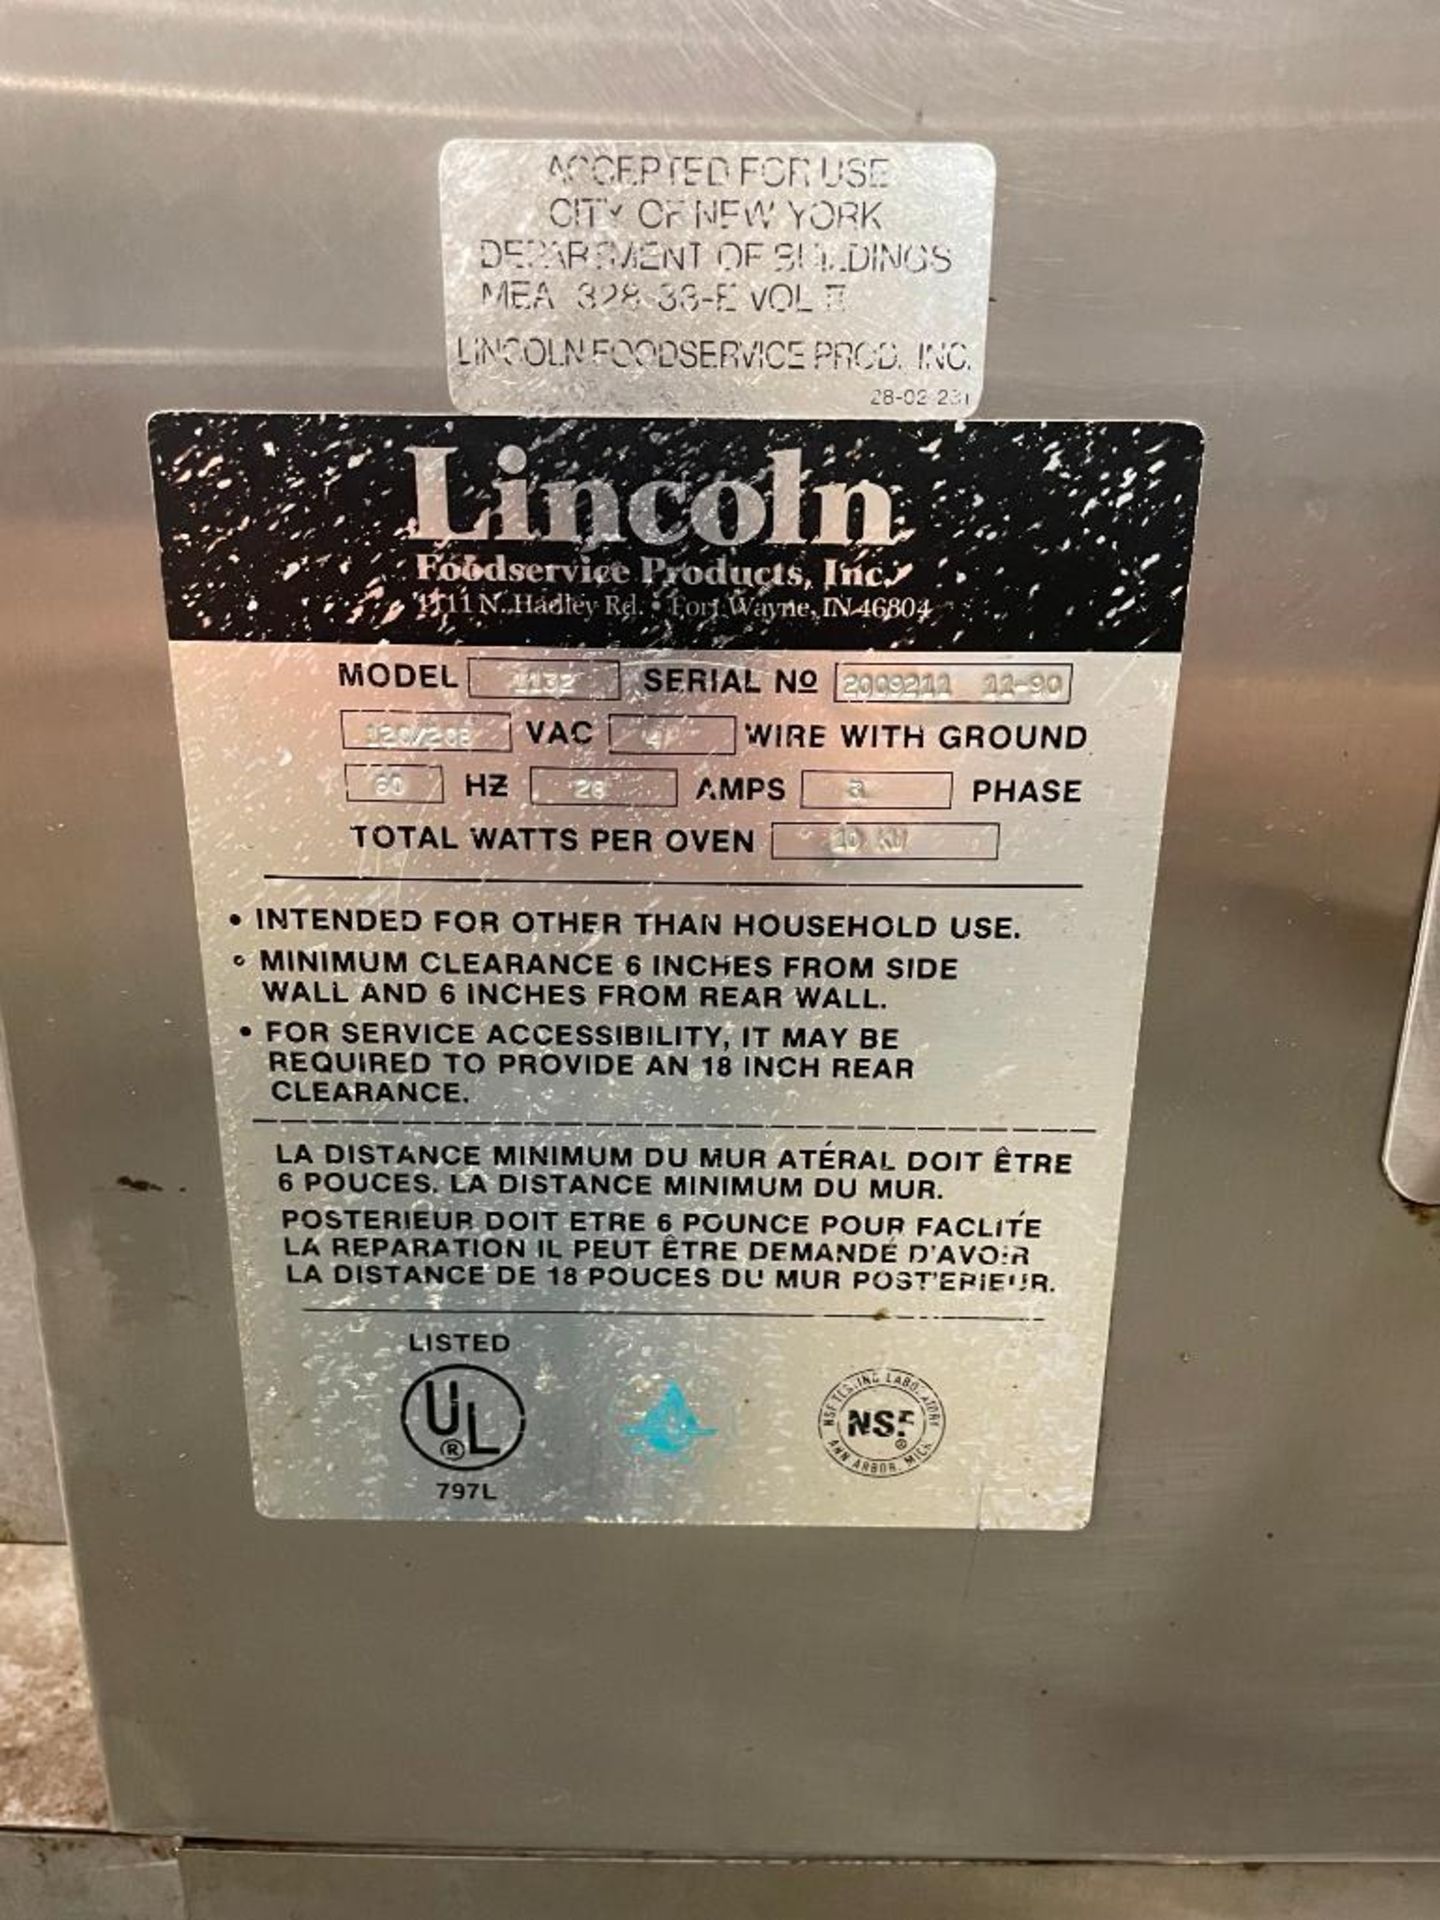 LINCOLN 1132 DOUBLE IMPINGER ELECTRIC CONVEYOR PIZZA OVEN - Image 10 of 13